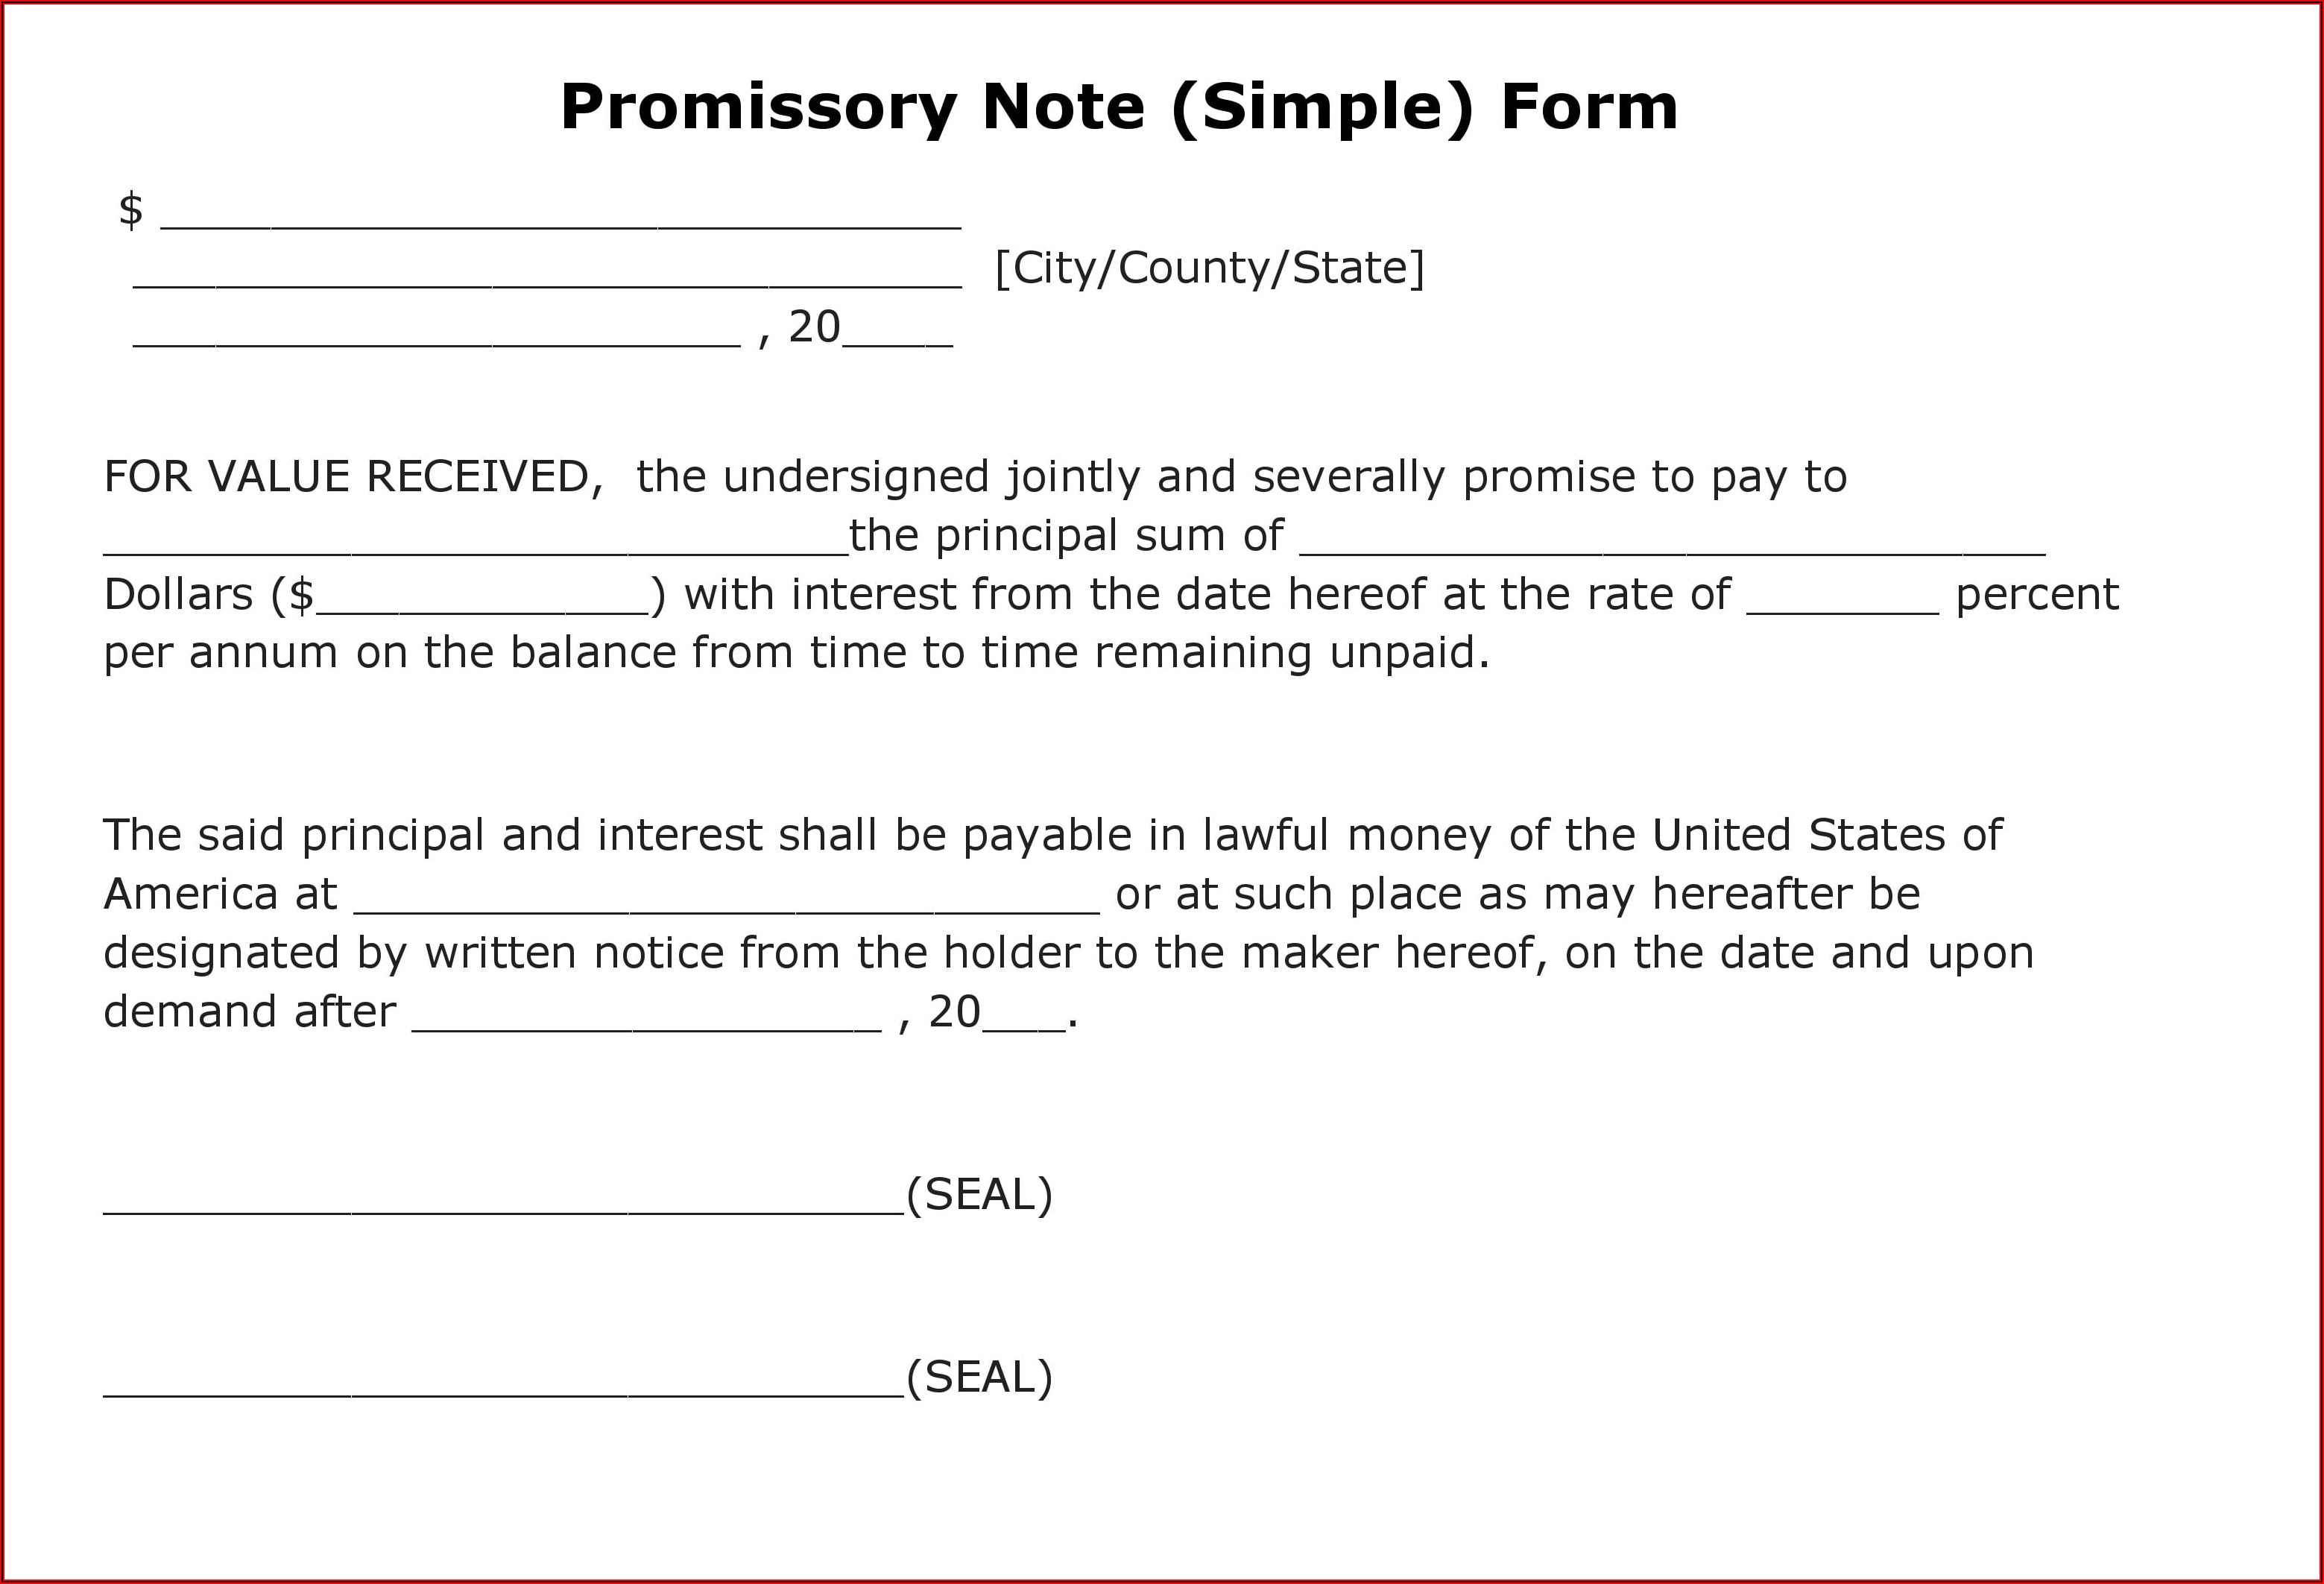 Canadian Promissory Note Form Template 2 Resume Examples Wk9y0L623D